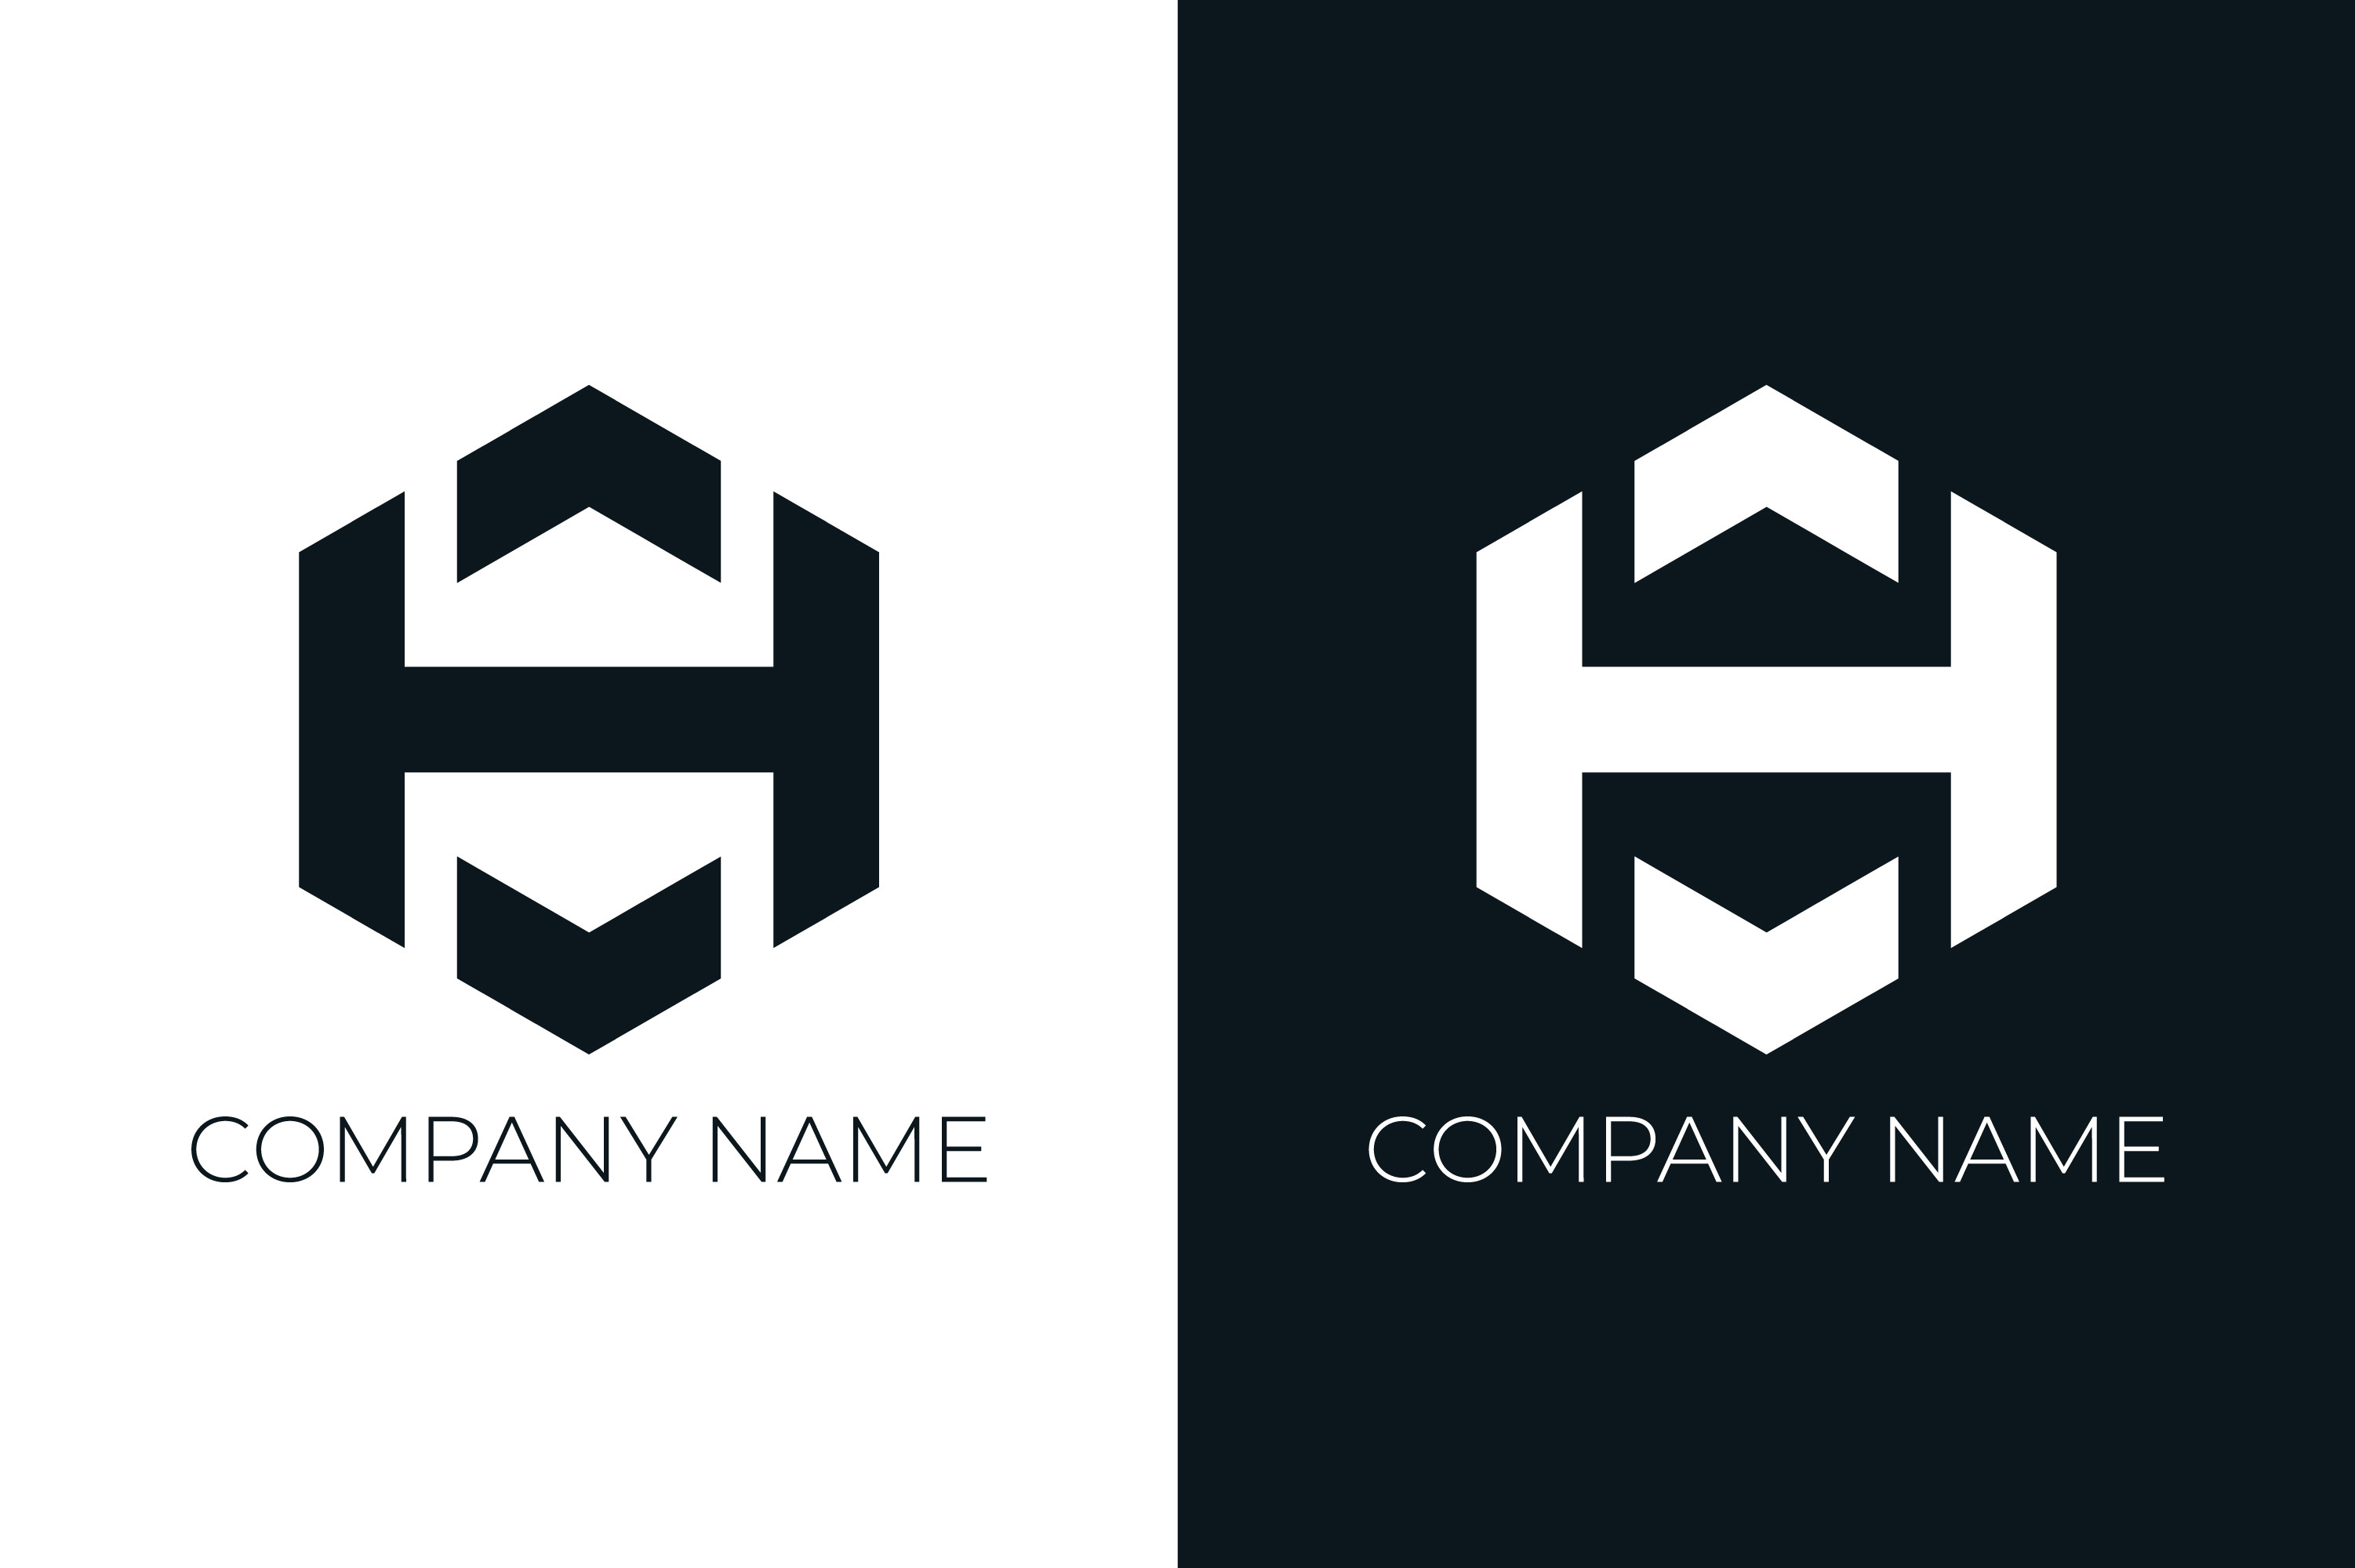 initial-letter-h-brand-logo-design-graphic-by-mdhelalakbar-creative